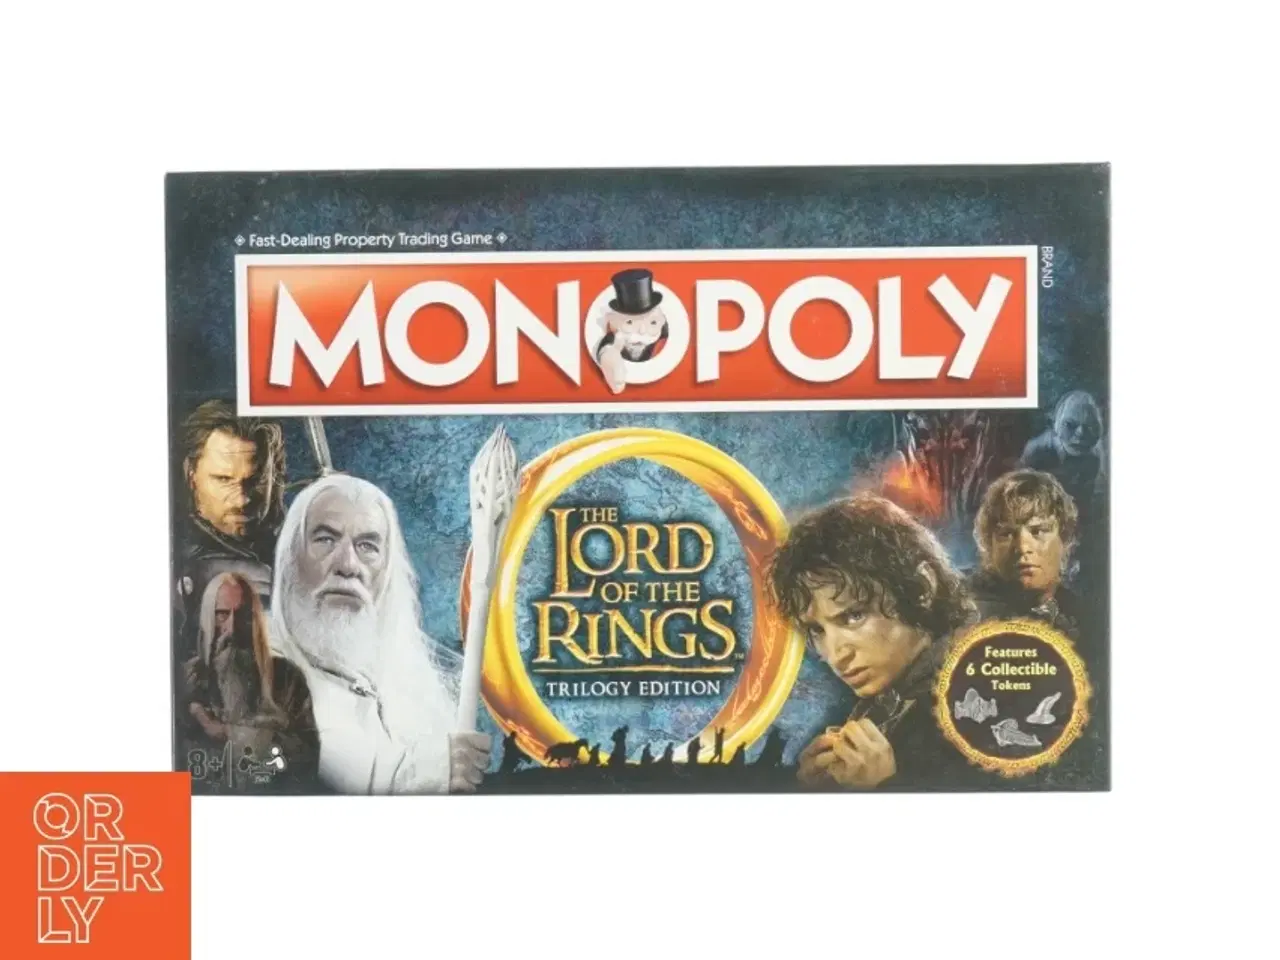 Billede 1 - Monopoly Lord of The Rings Trilogy Edition(str. 40 x 28cm)